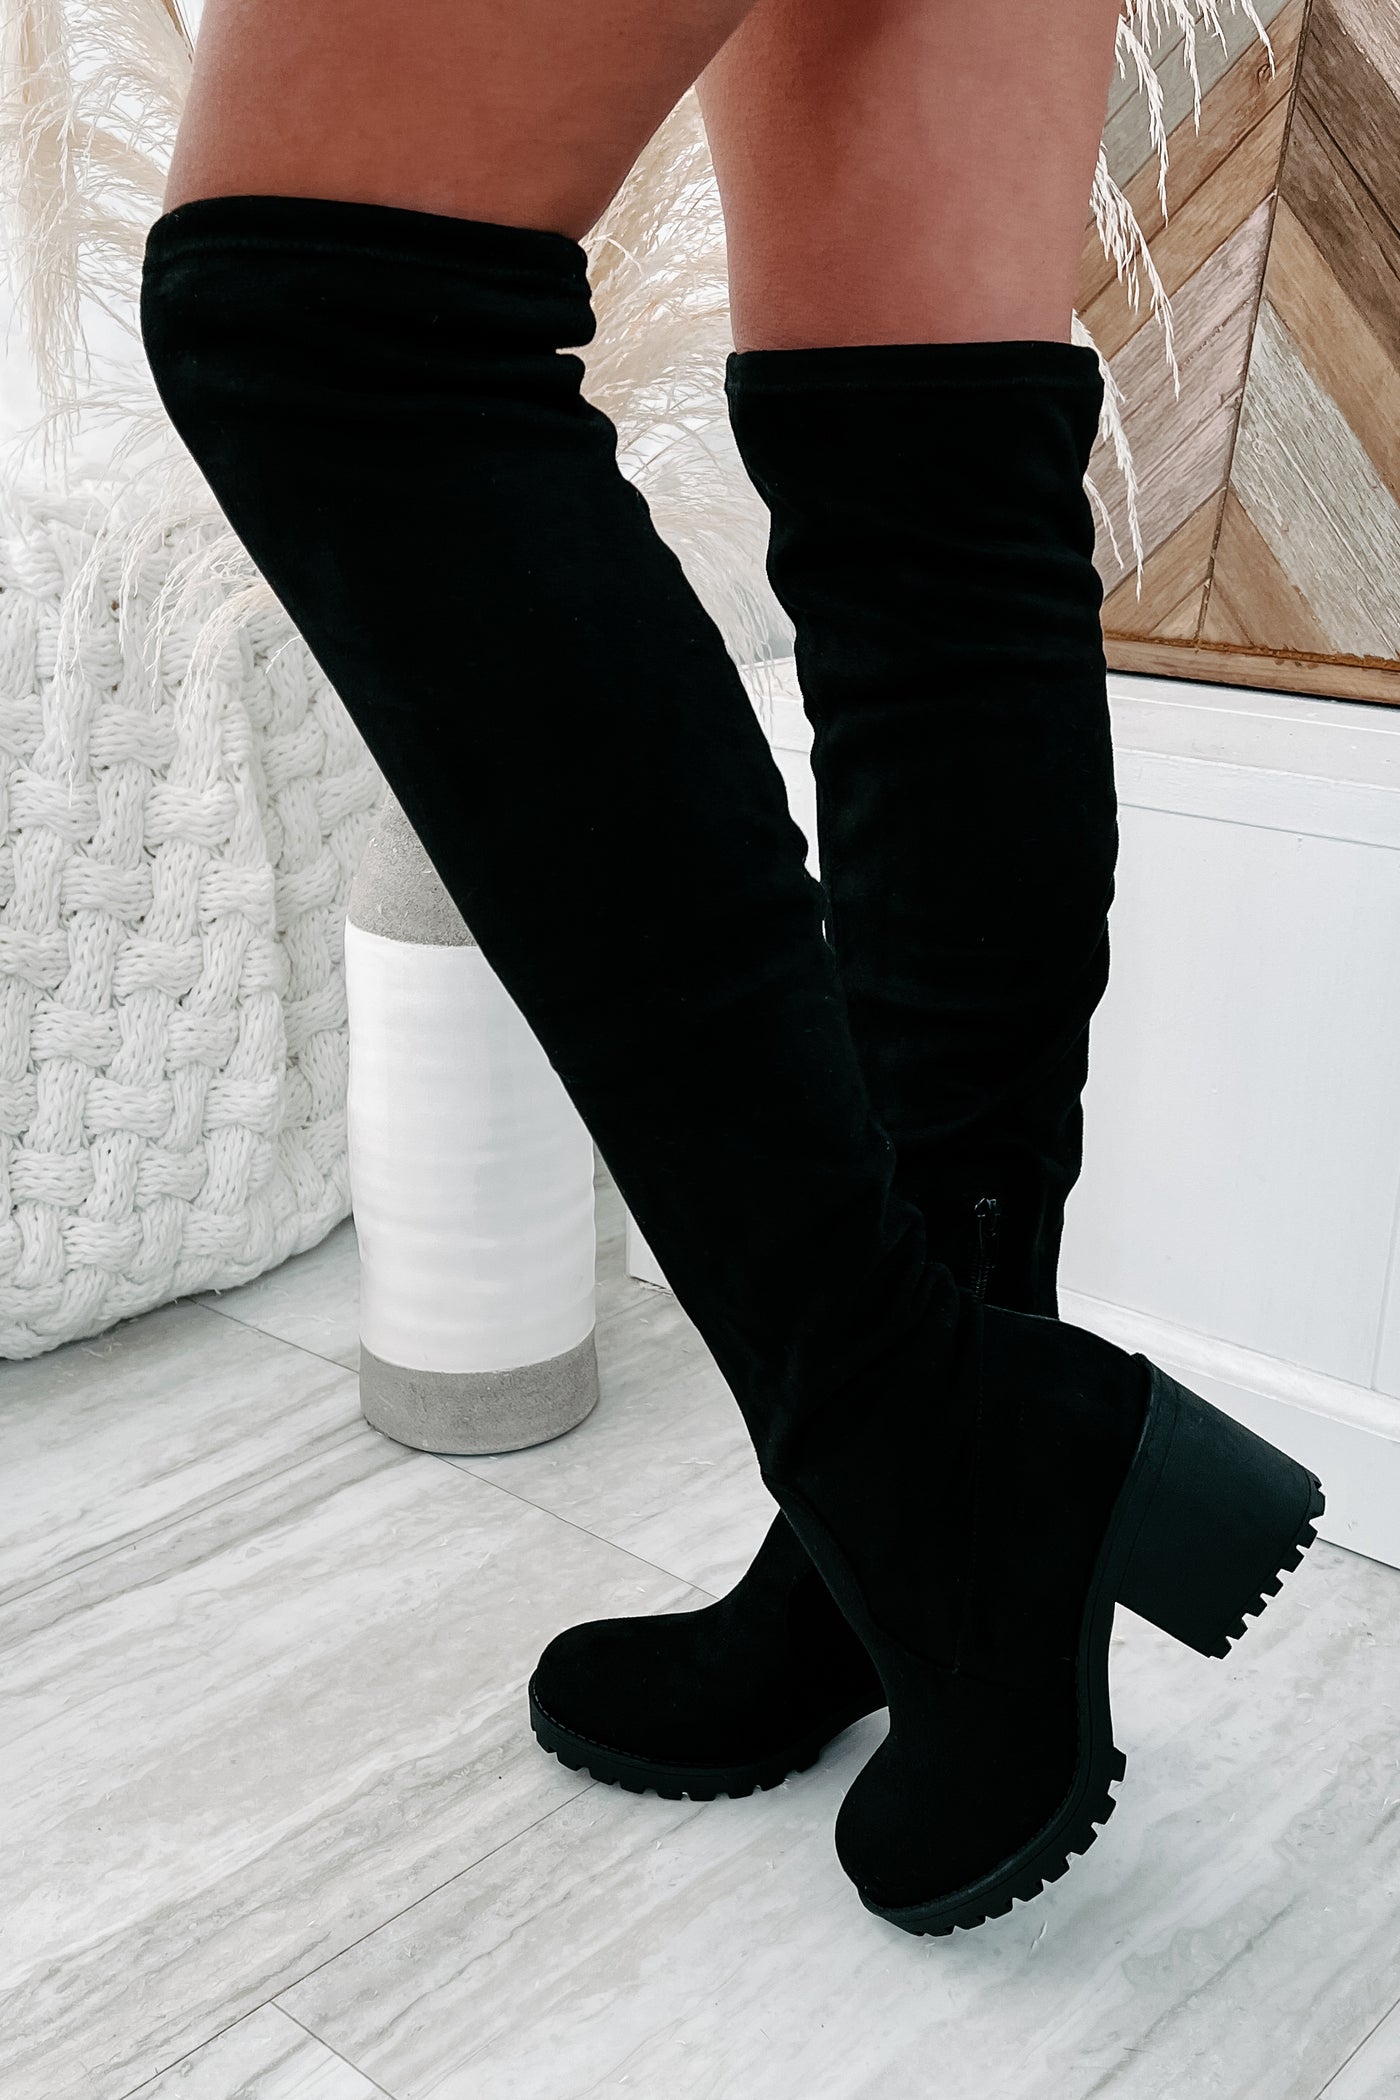 Get To Steppin' Faux Suede Over The Knee Boots (Black) - NanaMacs